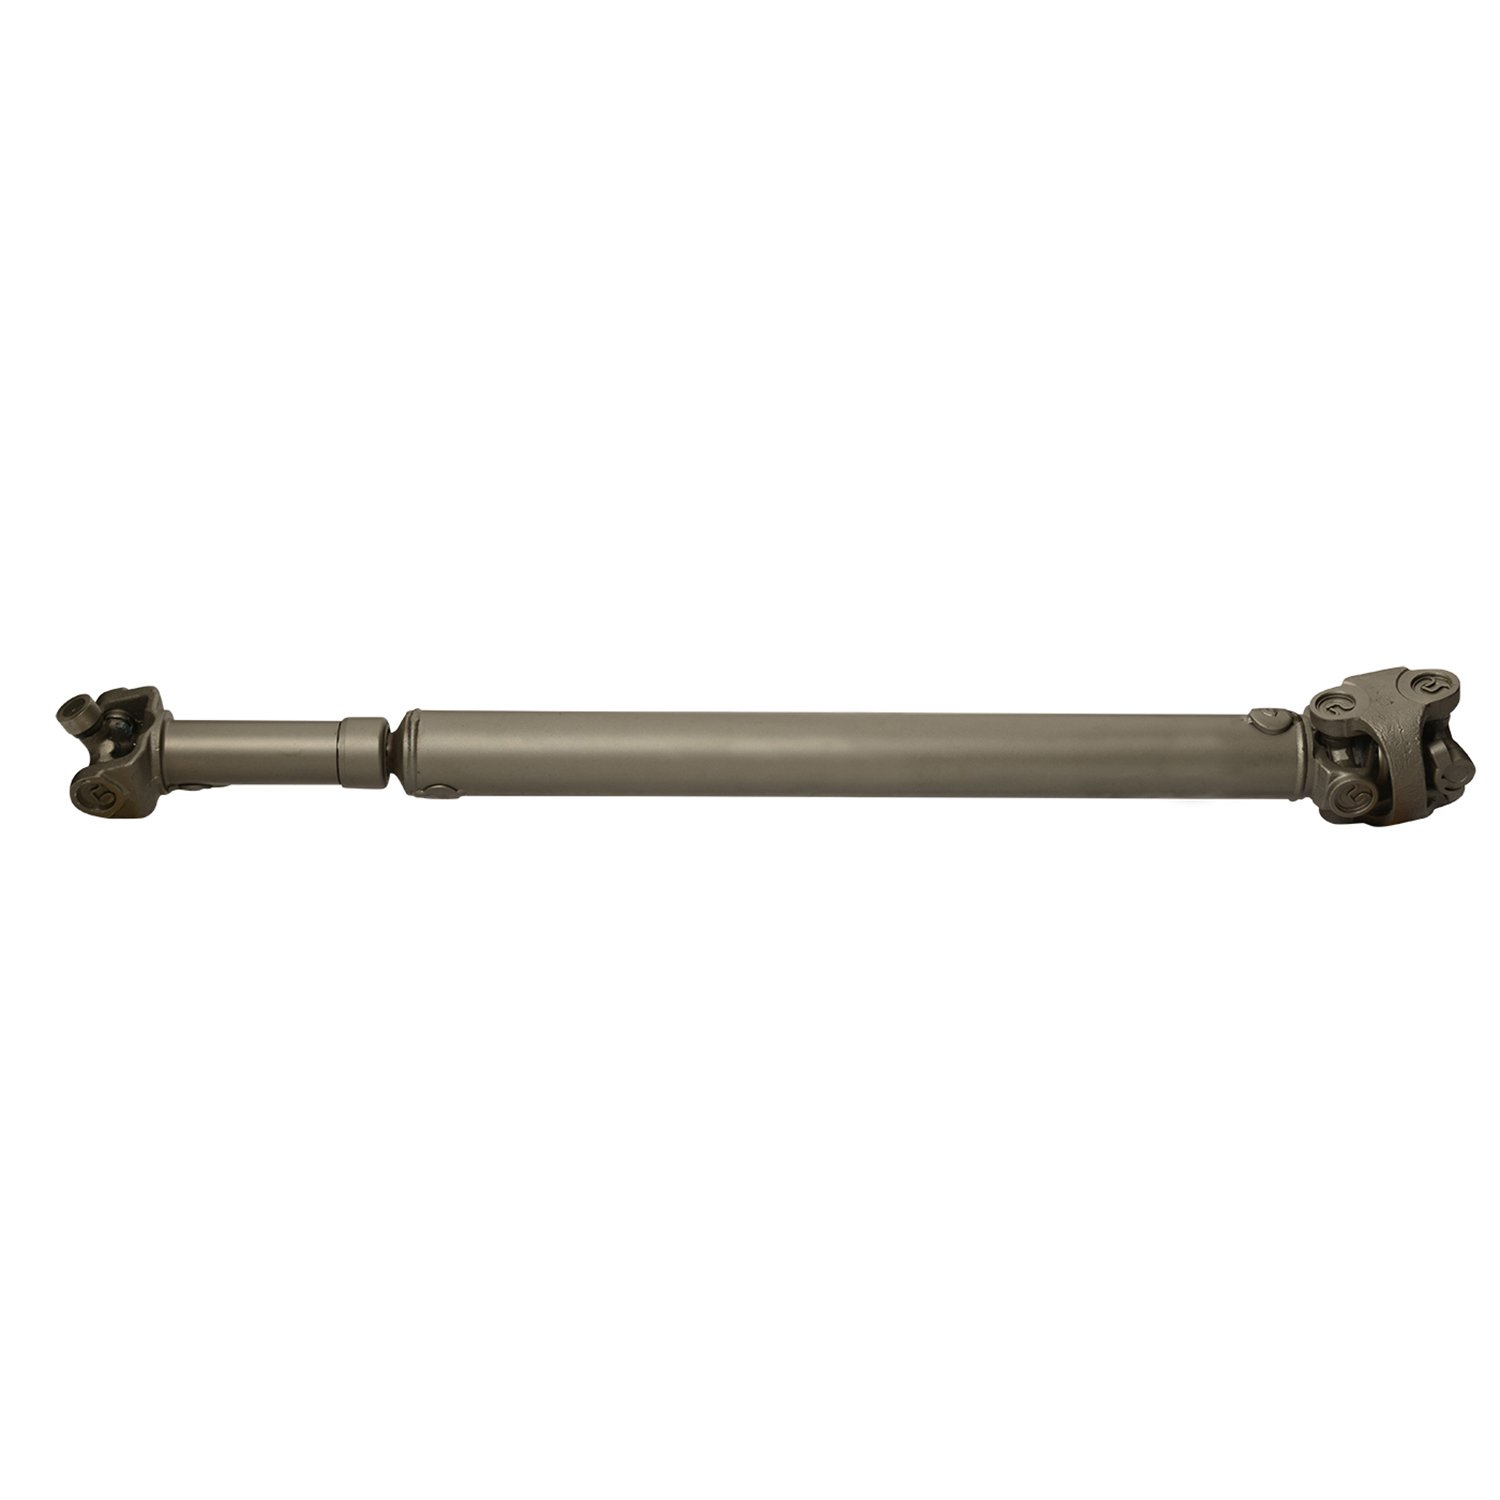 USA Standard ZDS9166 Front Driveshaft, For Bronco/F-Series, 30.0625 in. Center-To-Center